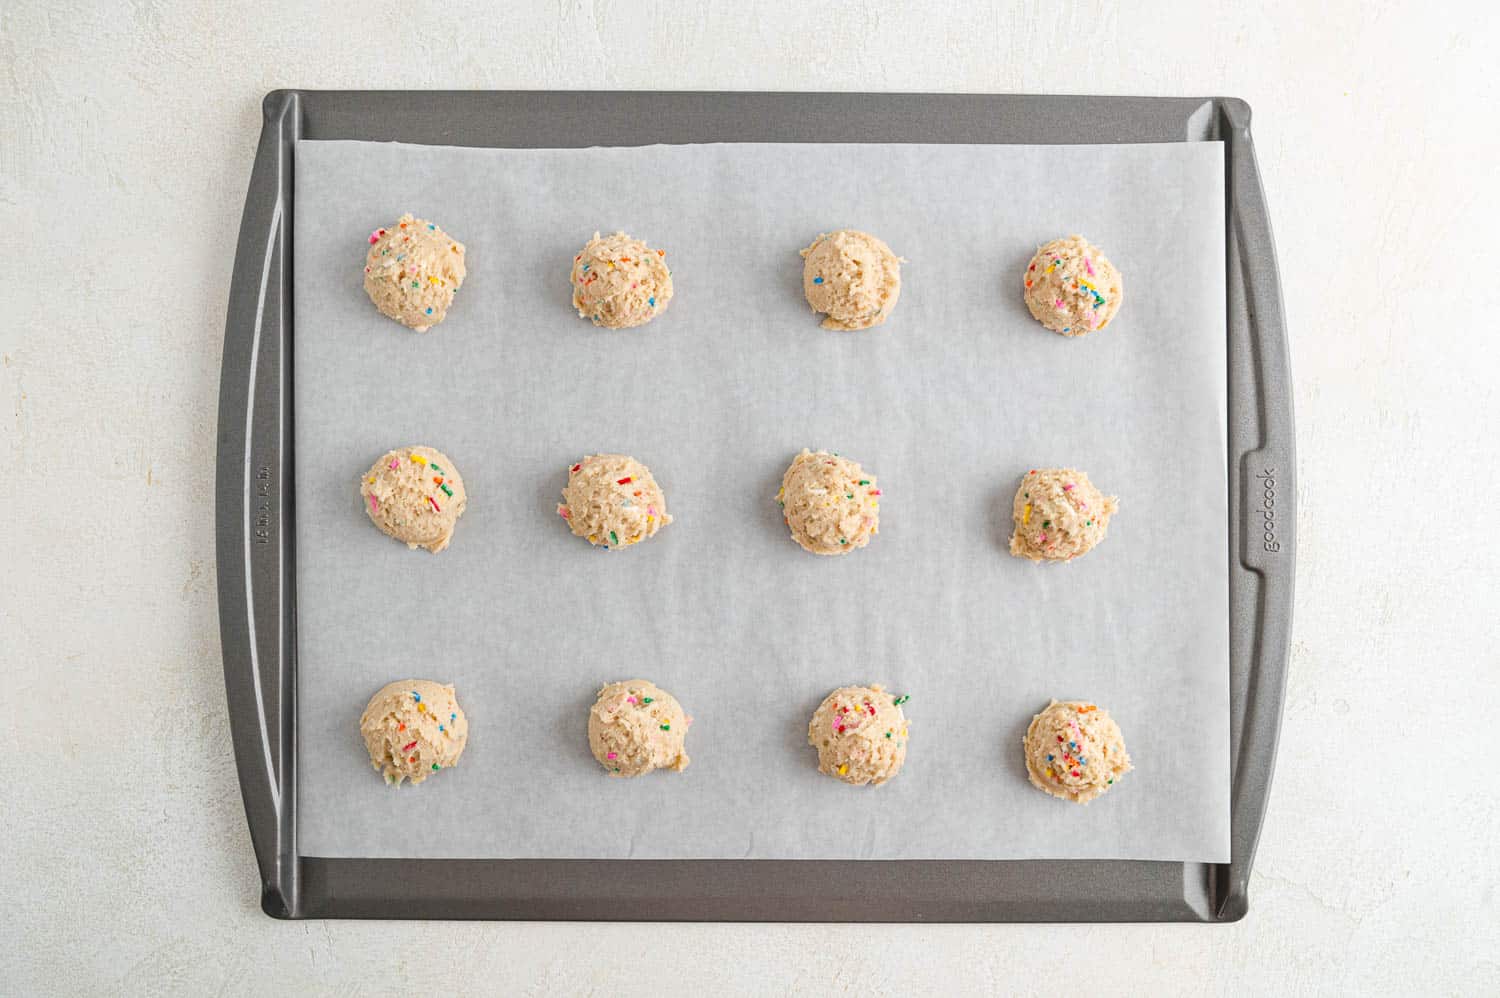 Unbaked cookie dough on cookie sheet.